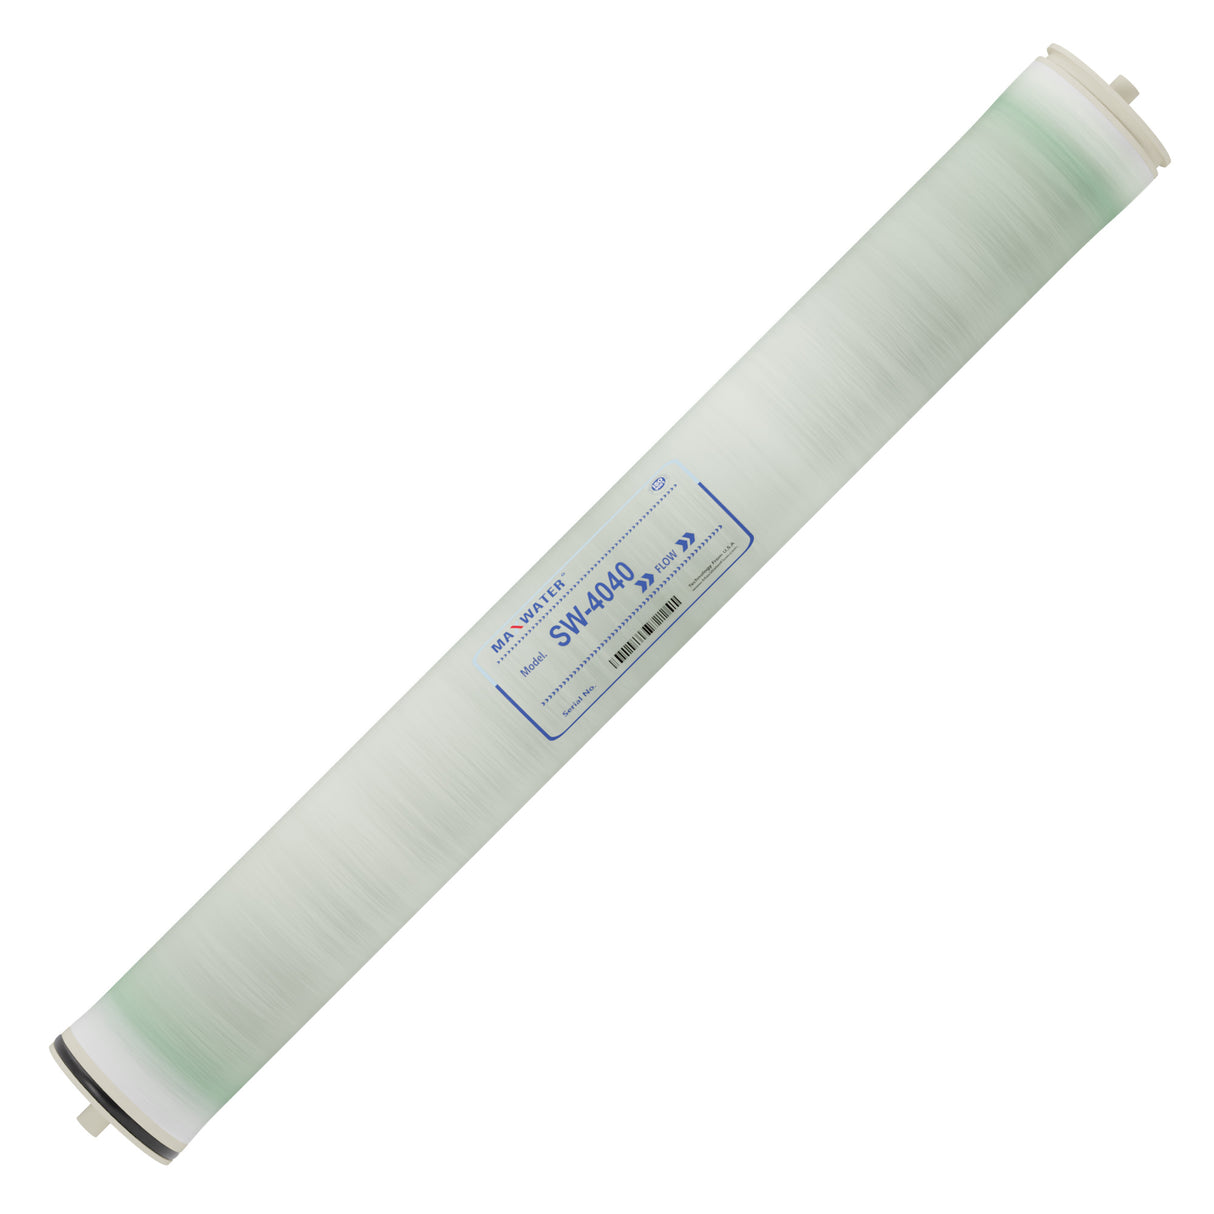 SW variant 4x40-inch RO membrane - ideal for seawater filtration in commercial setups.